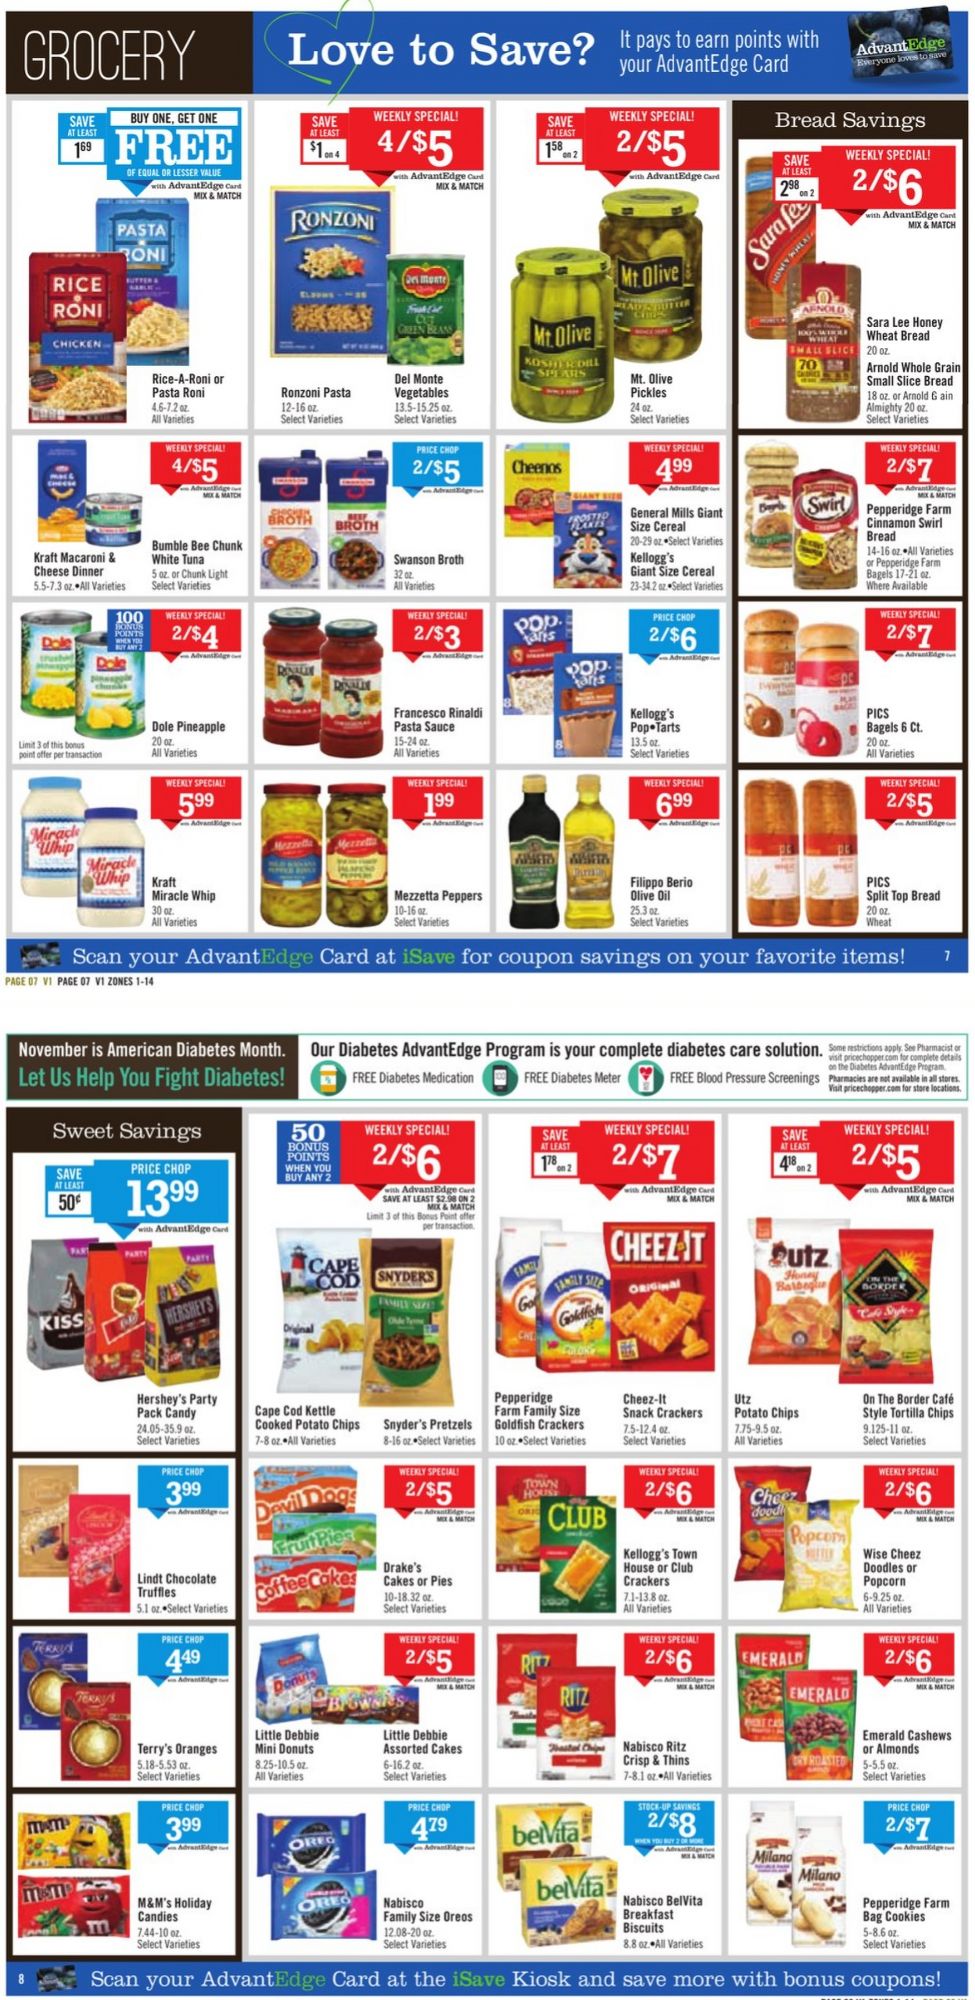 Price Chopper Black Friday July 2024 Weekly Sales, Deals, Discounts and Digital Coupons.